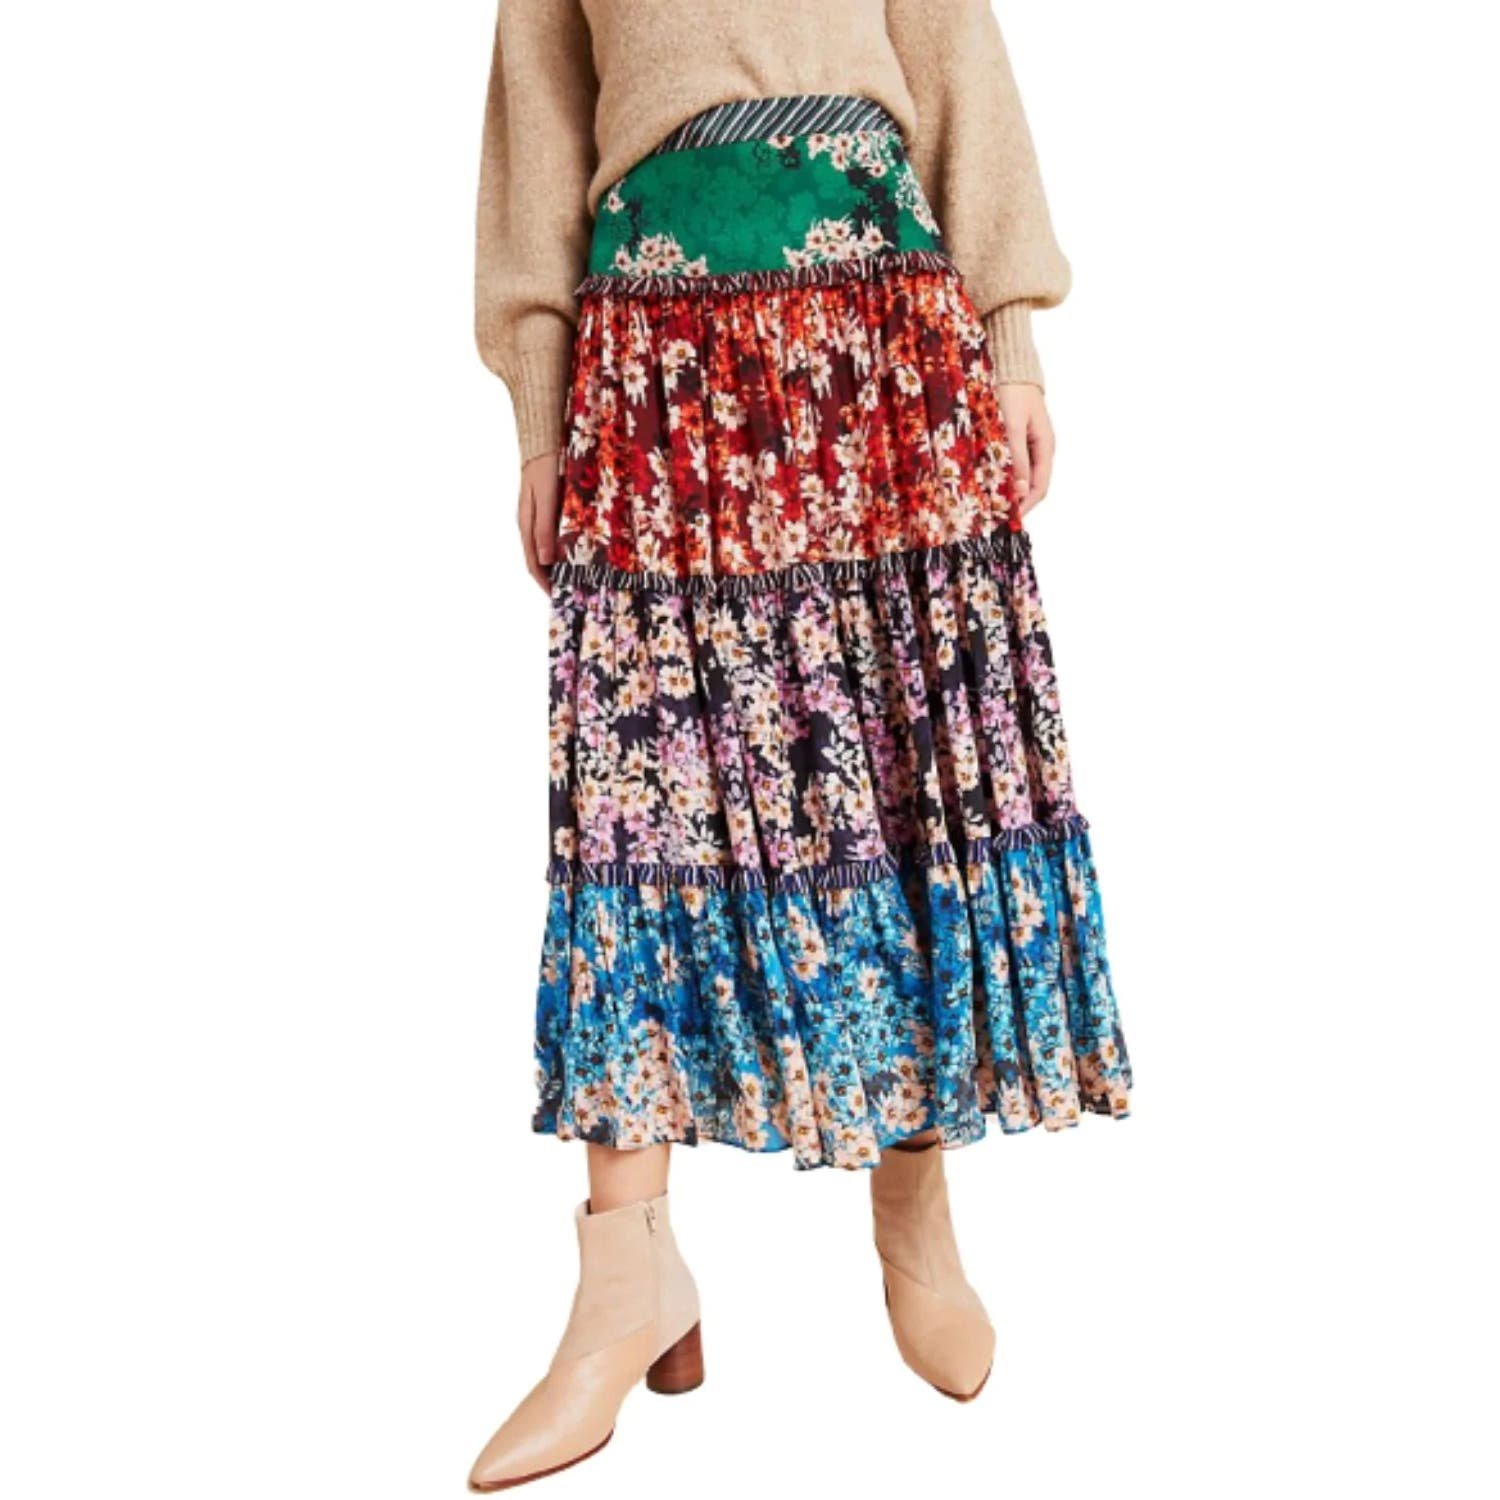 save up to 70% Anthropologie Bhanuni Maxi Skirt Tiered Floral Print Crepe A-Line Multicolor 10 fHpp1kqBG on sale